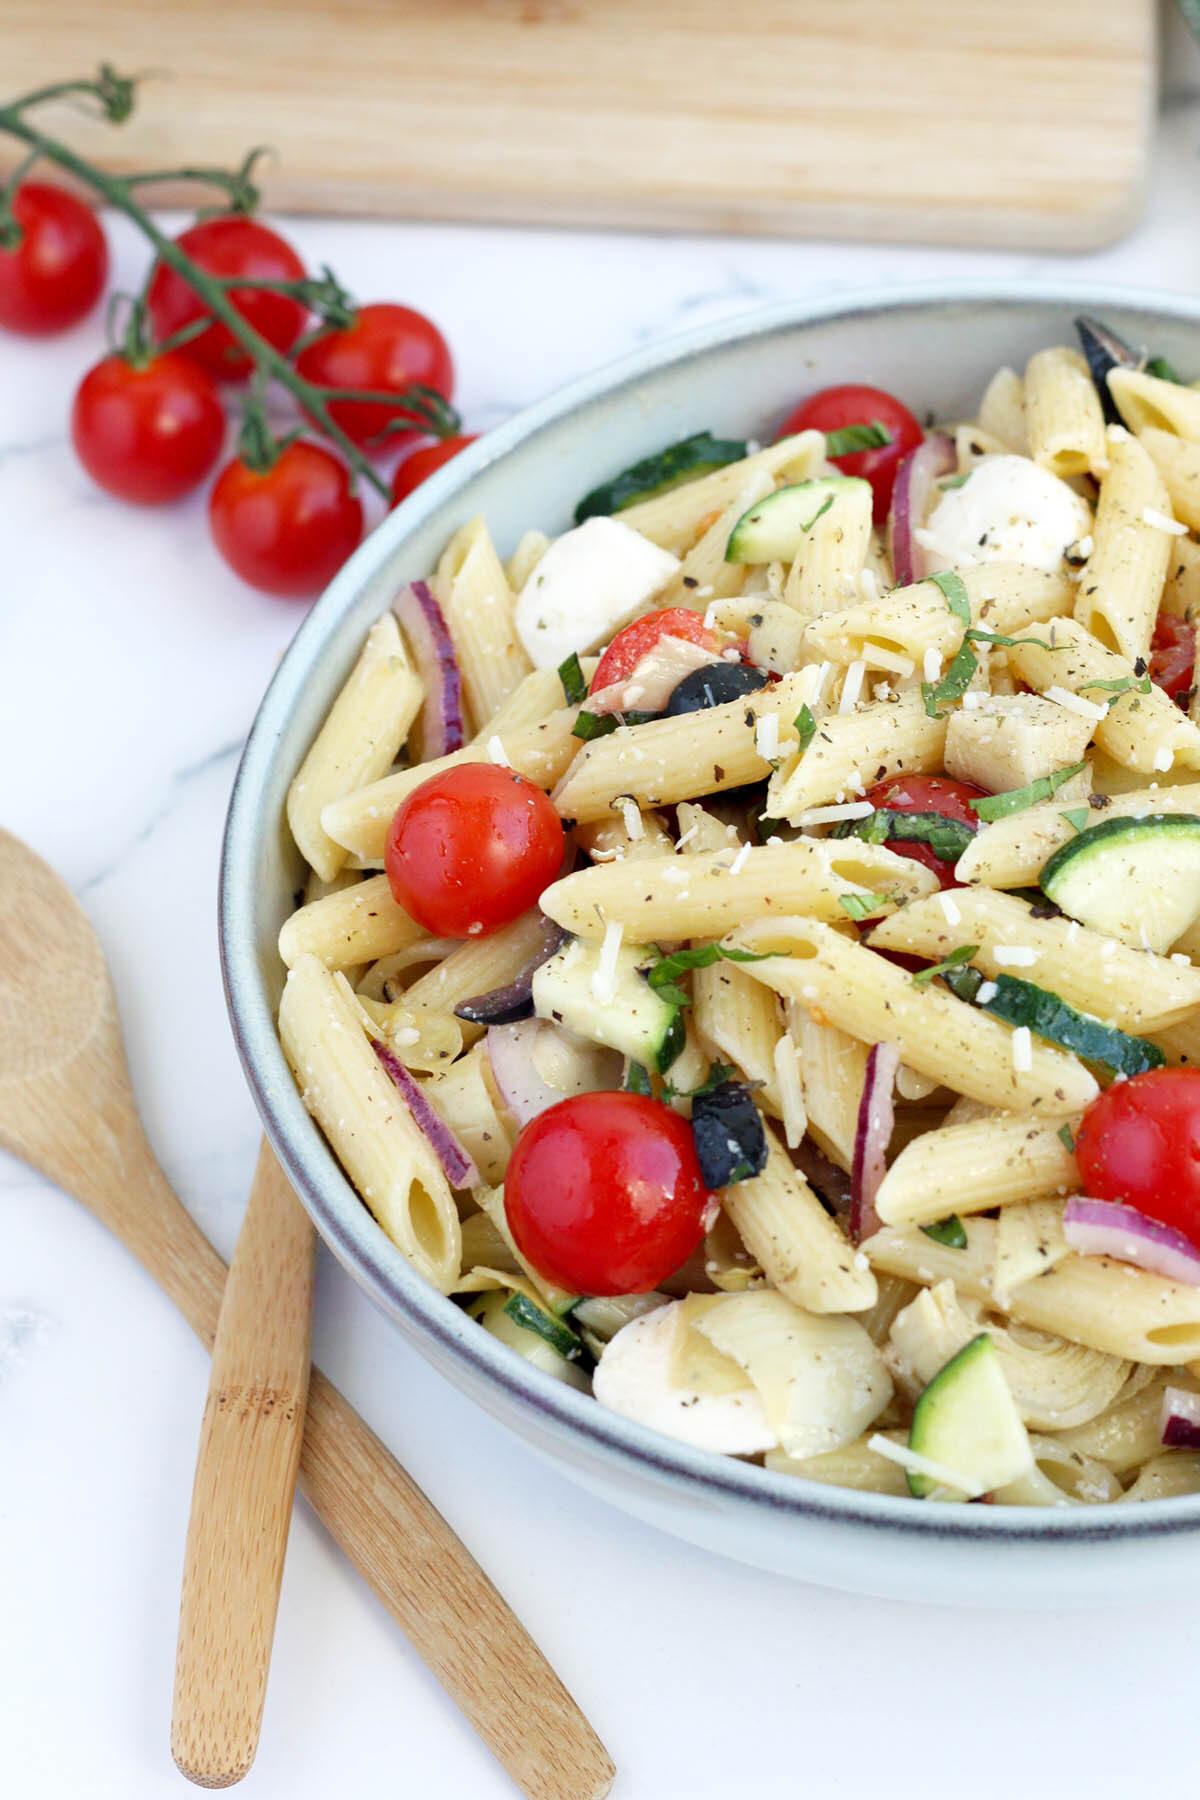 Italian pasta salad with tomatoes and zucchini in a bowl with wooden utensils